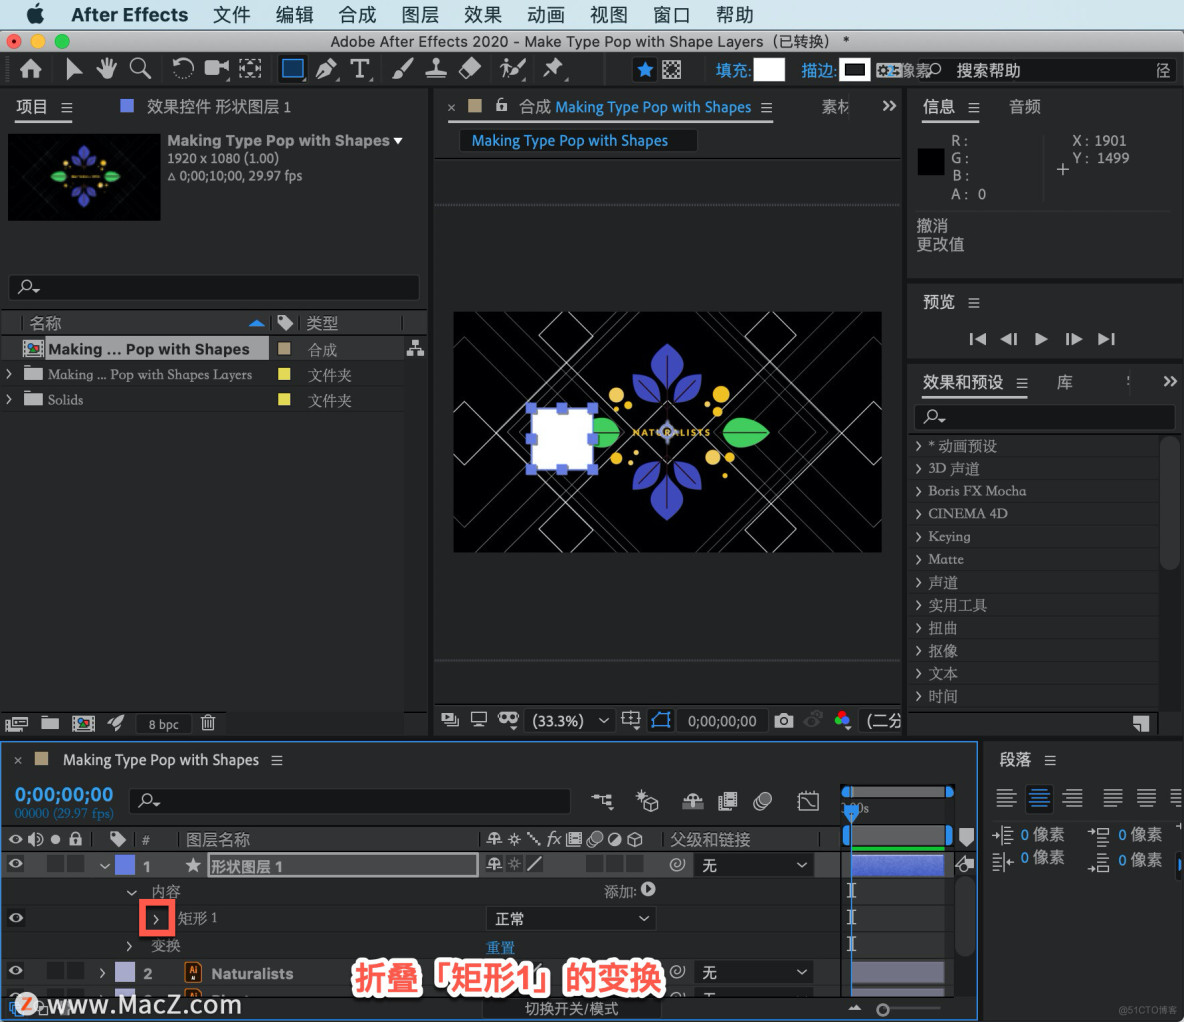 After Effects 教程，如何在 After Effects 中创建形状图层？_After Effects_09